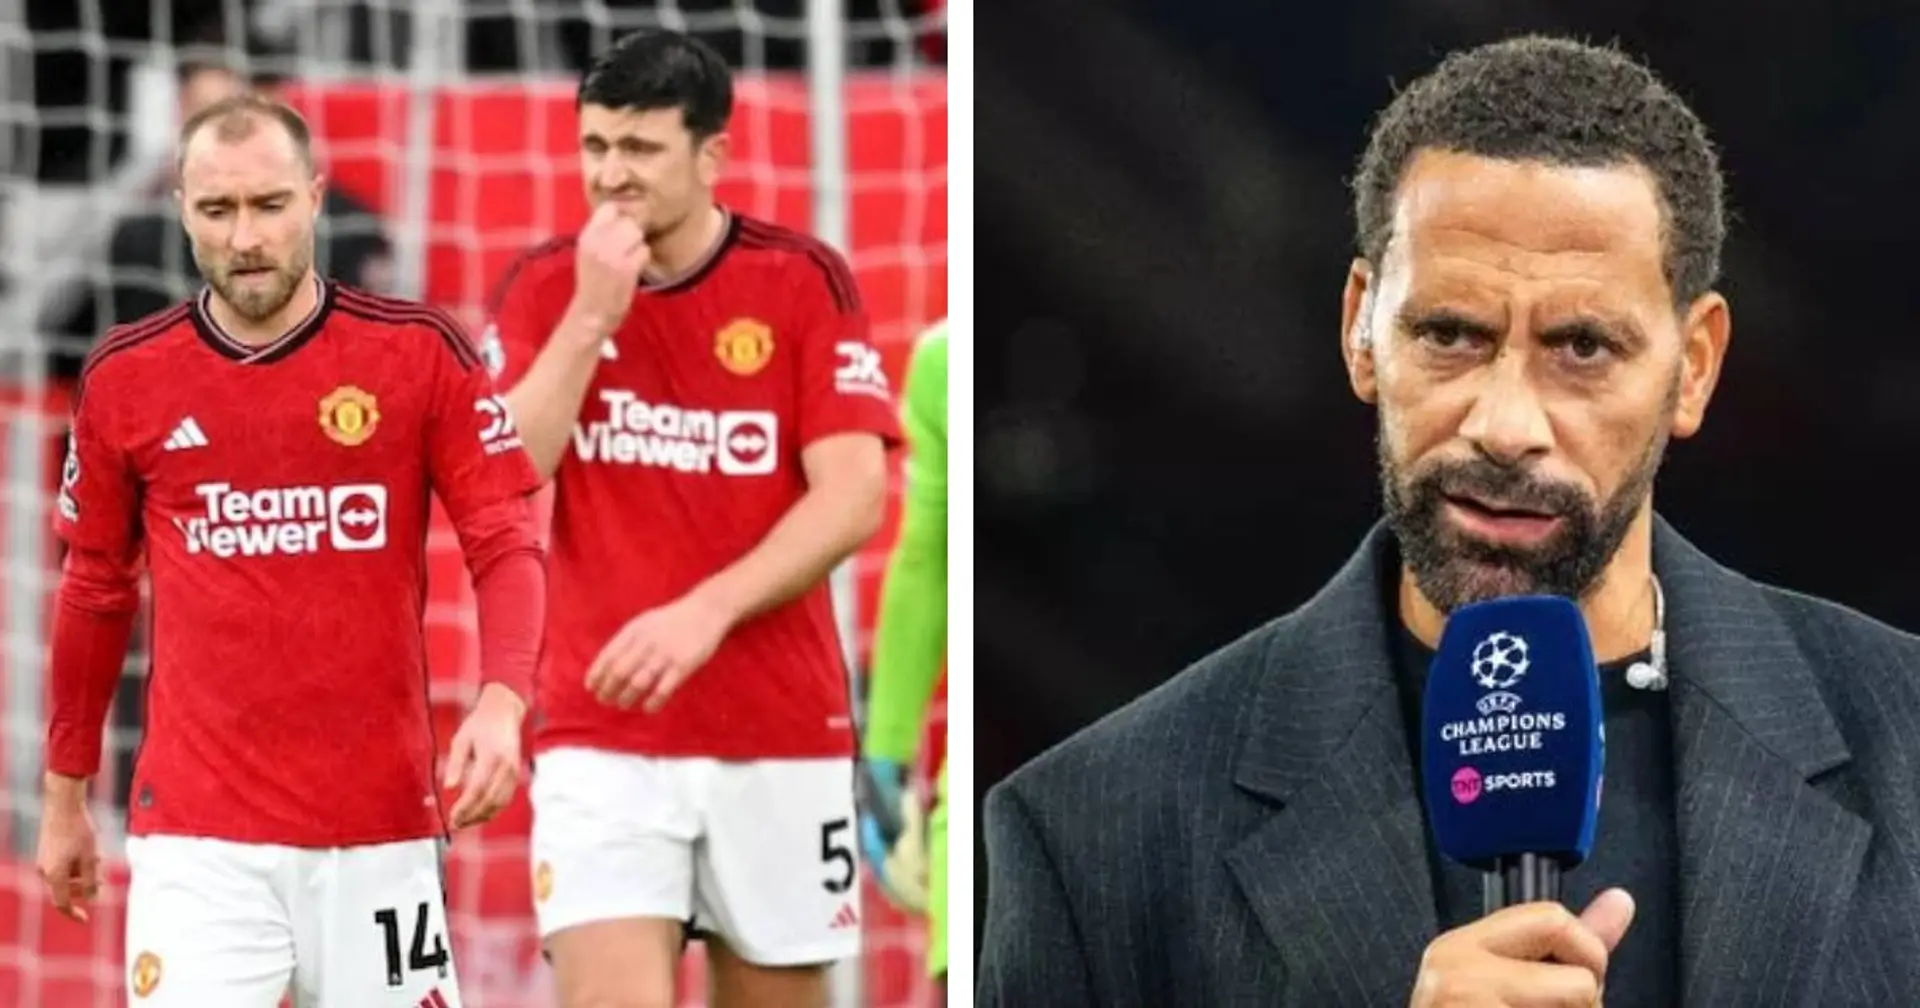 'Other teams have injuries too': Rio Ferdinand slams excuses as Man United form goes downhill